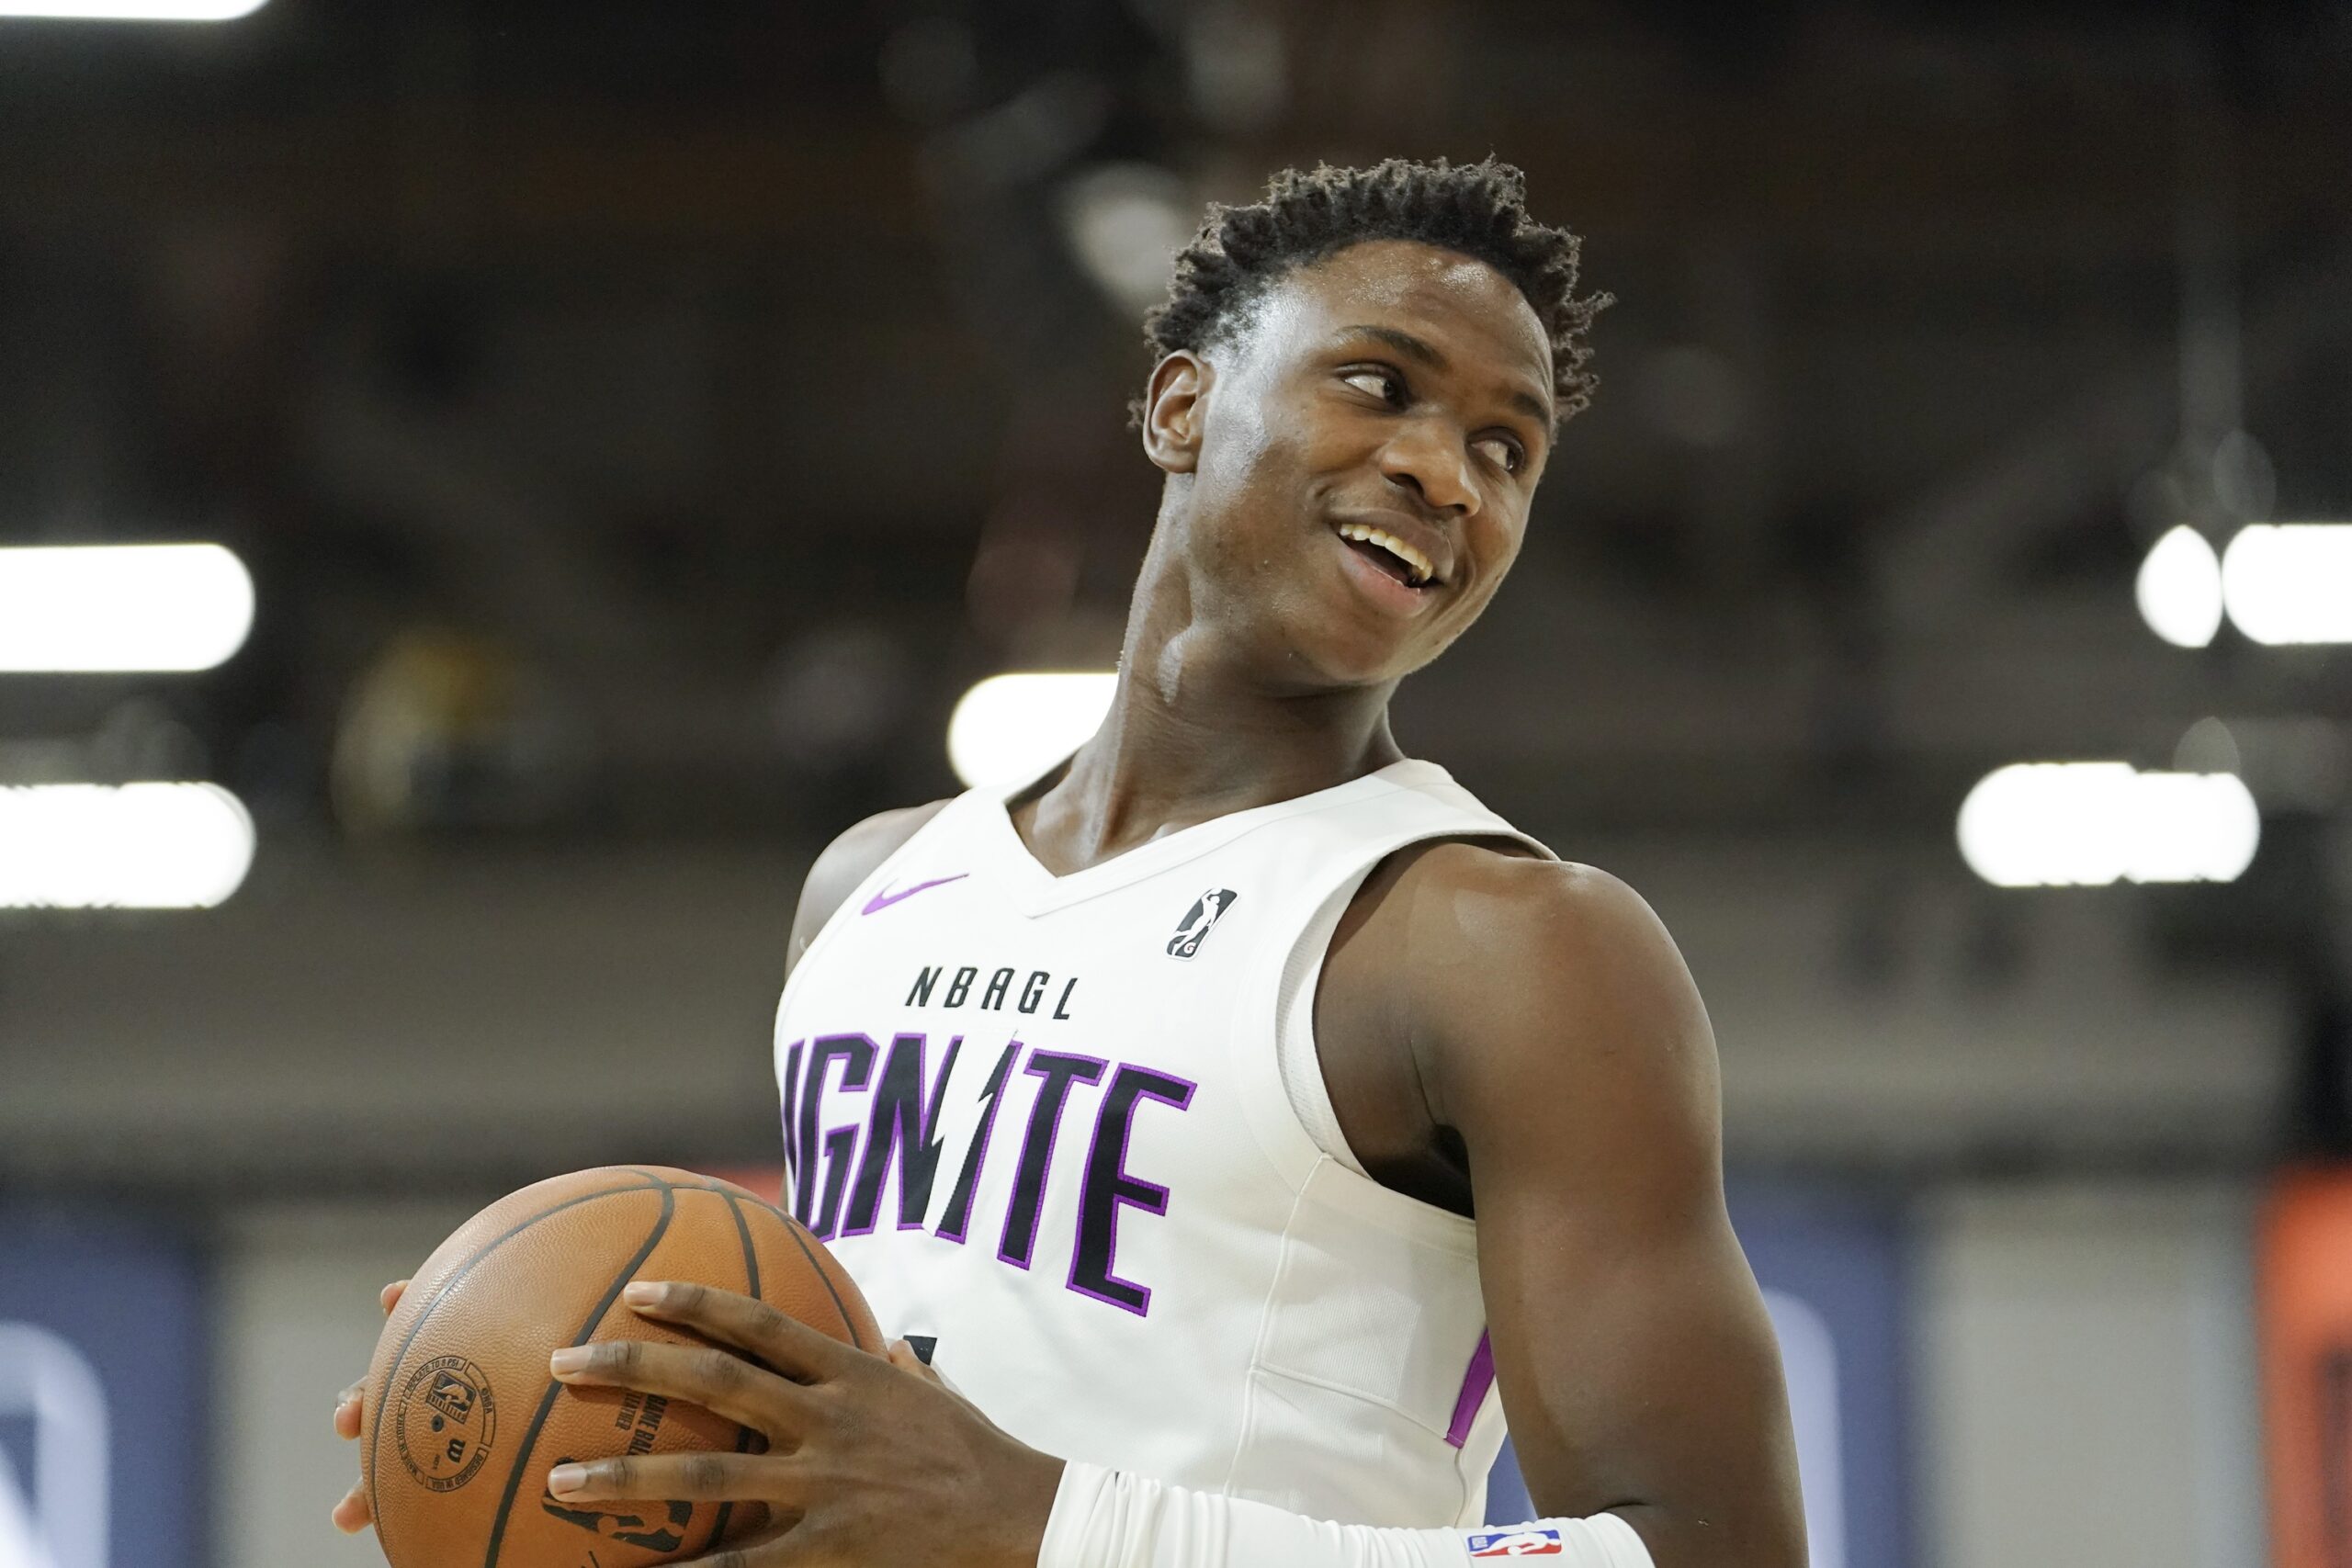 Babacar Sane is one of the G-League Ignite prospects in this year's draft.